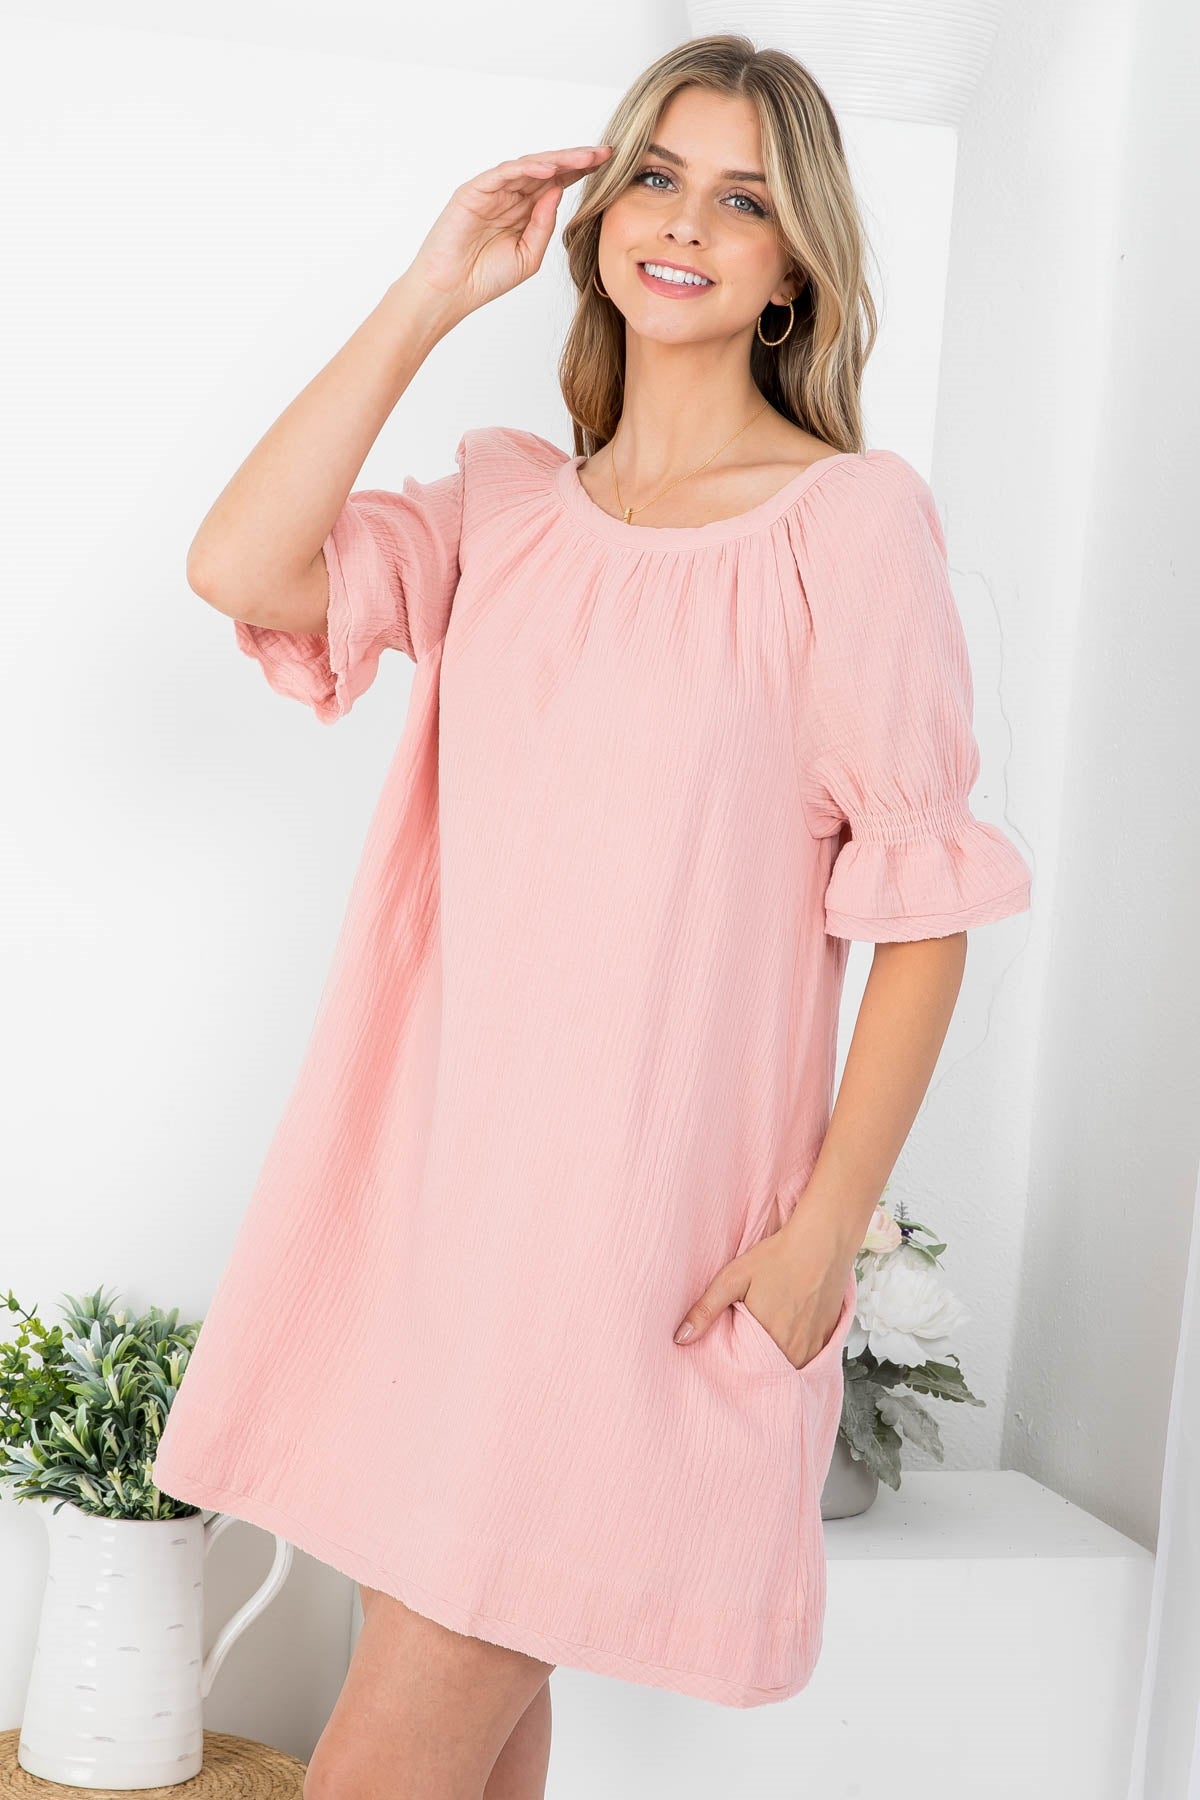 BLUSH SCOOPED NECKLINE WITH SIDE POCKET BACK BOW-TIE DRESS